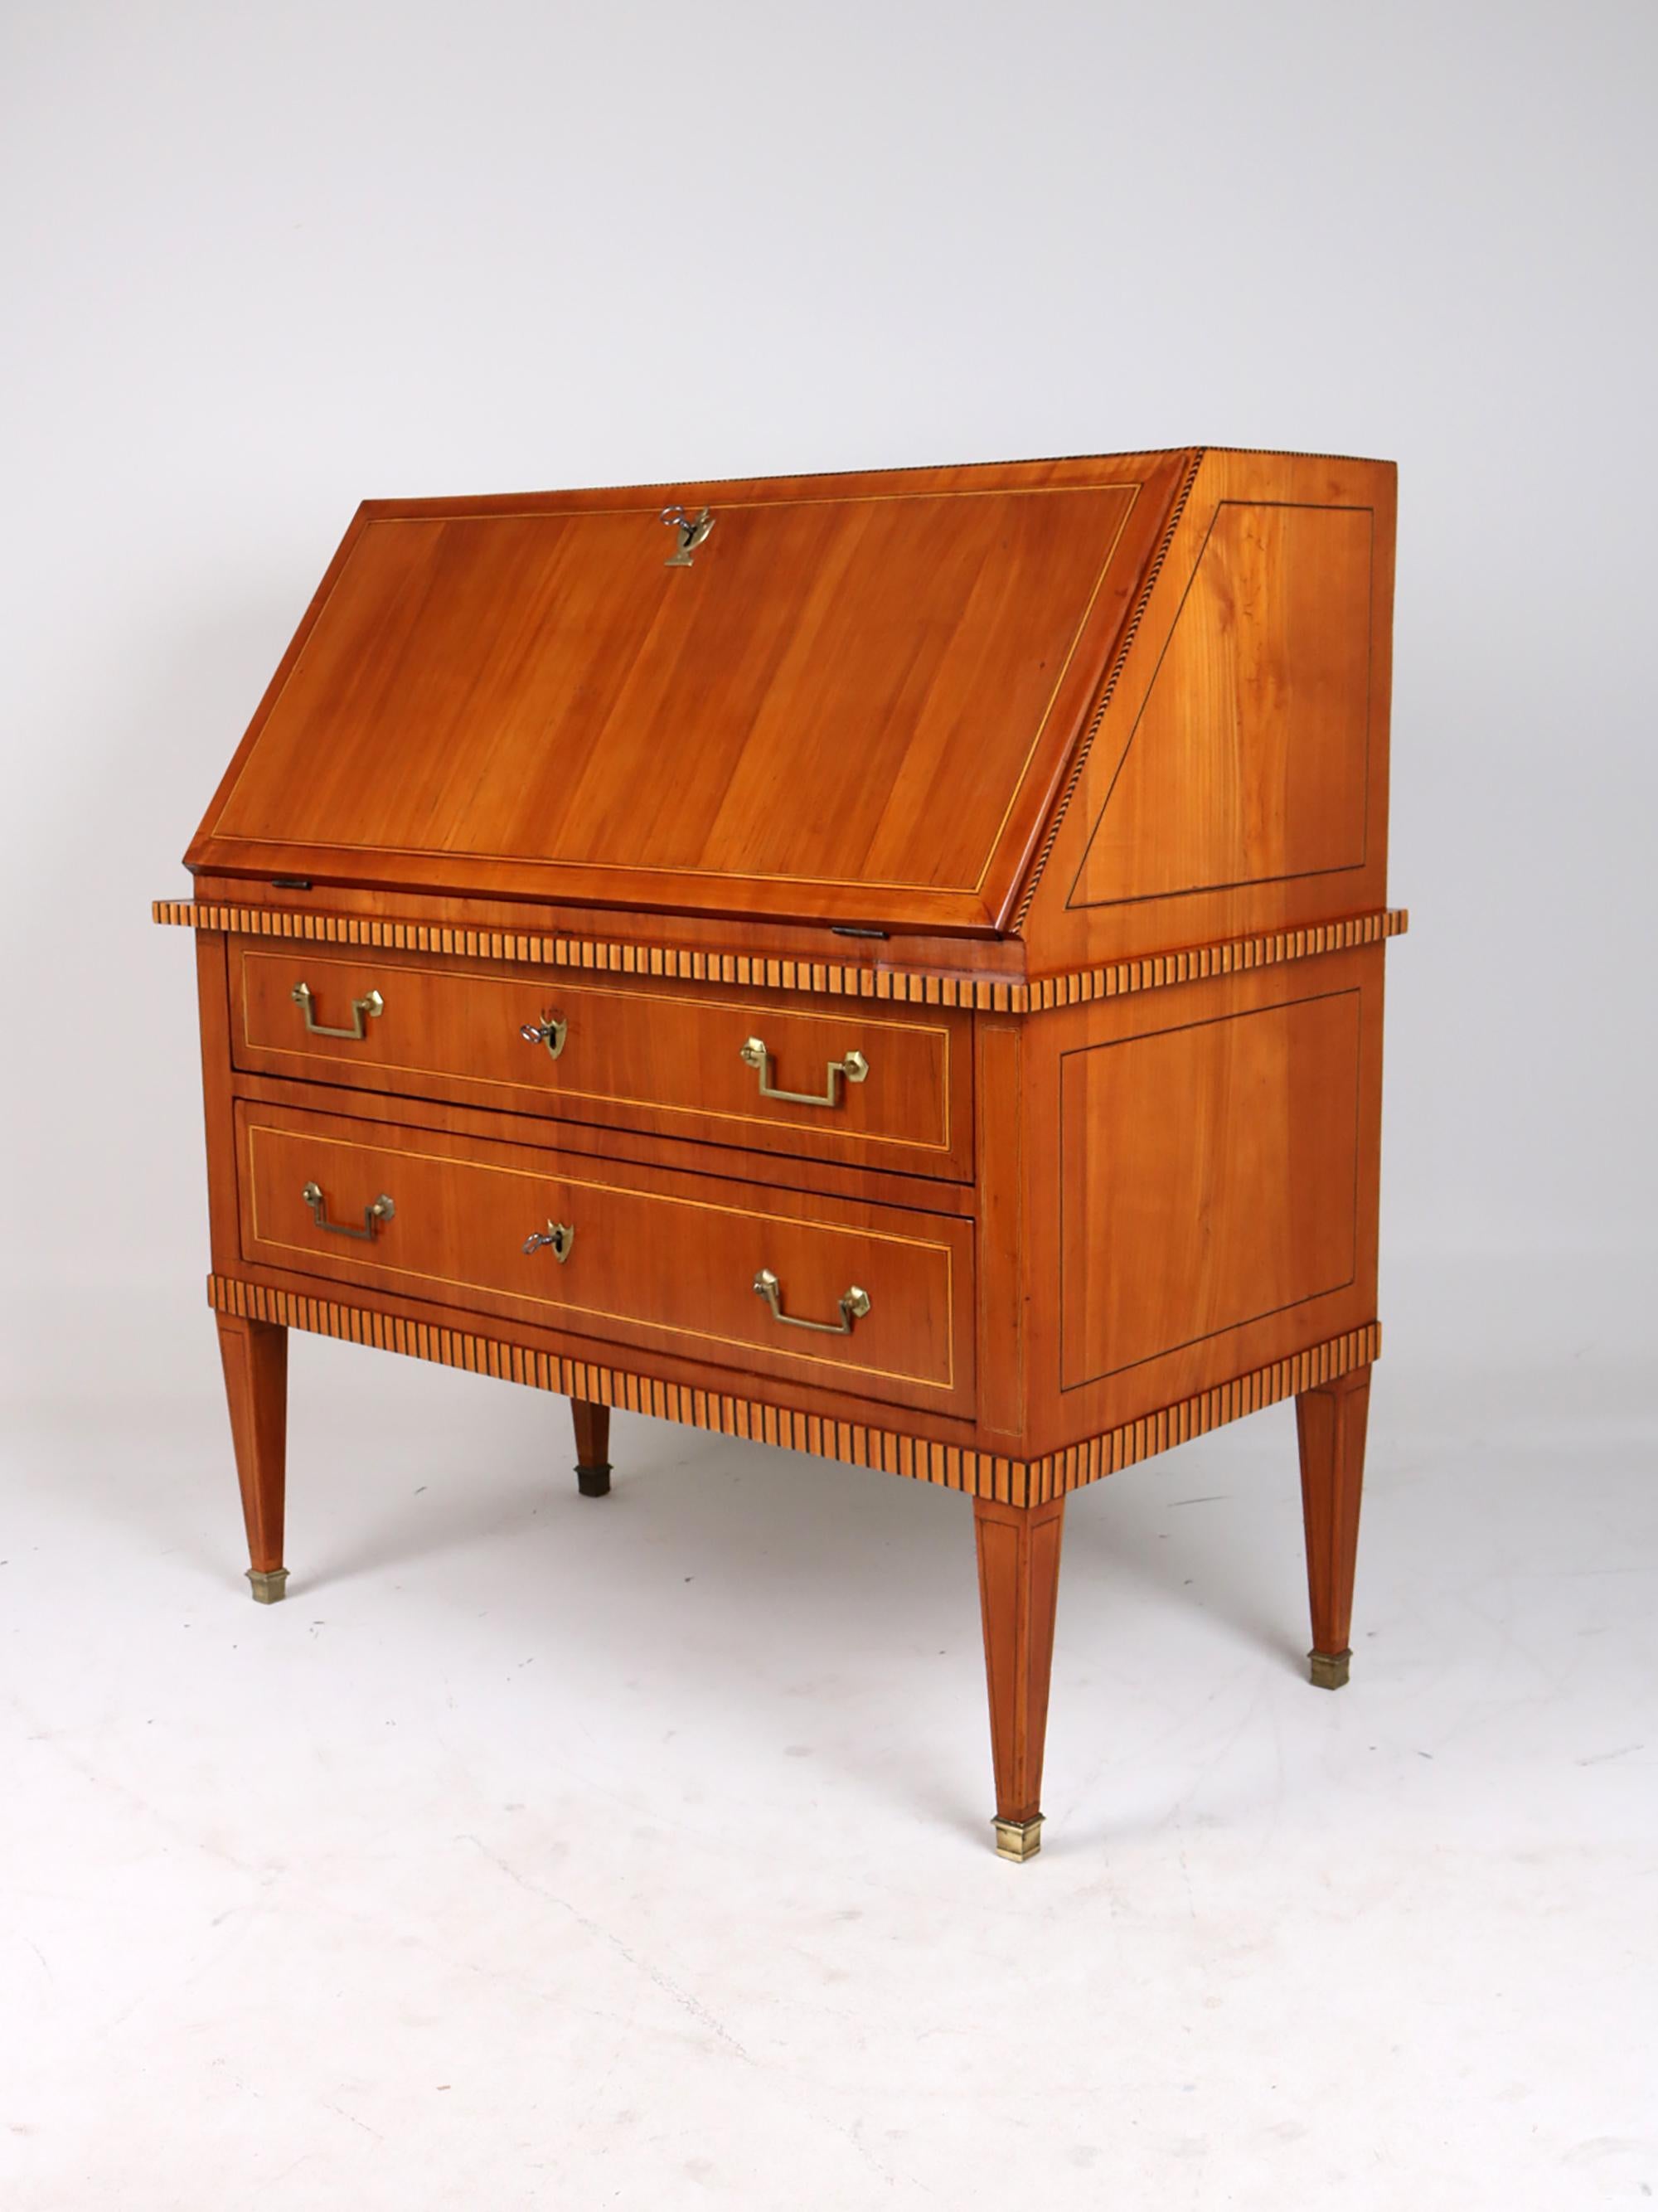 Polished Early 19th Century Louis XVI Secretary with Slant Front